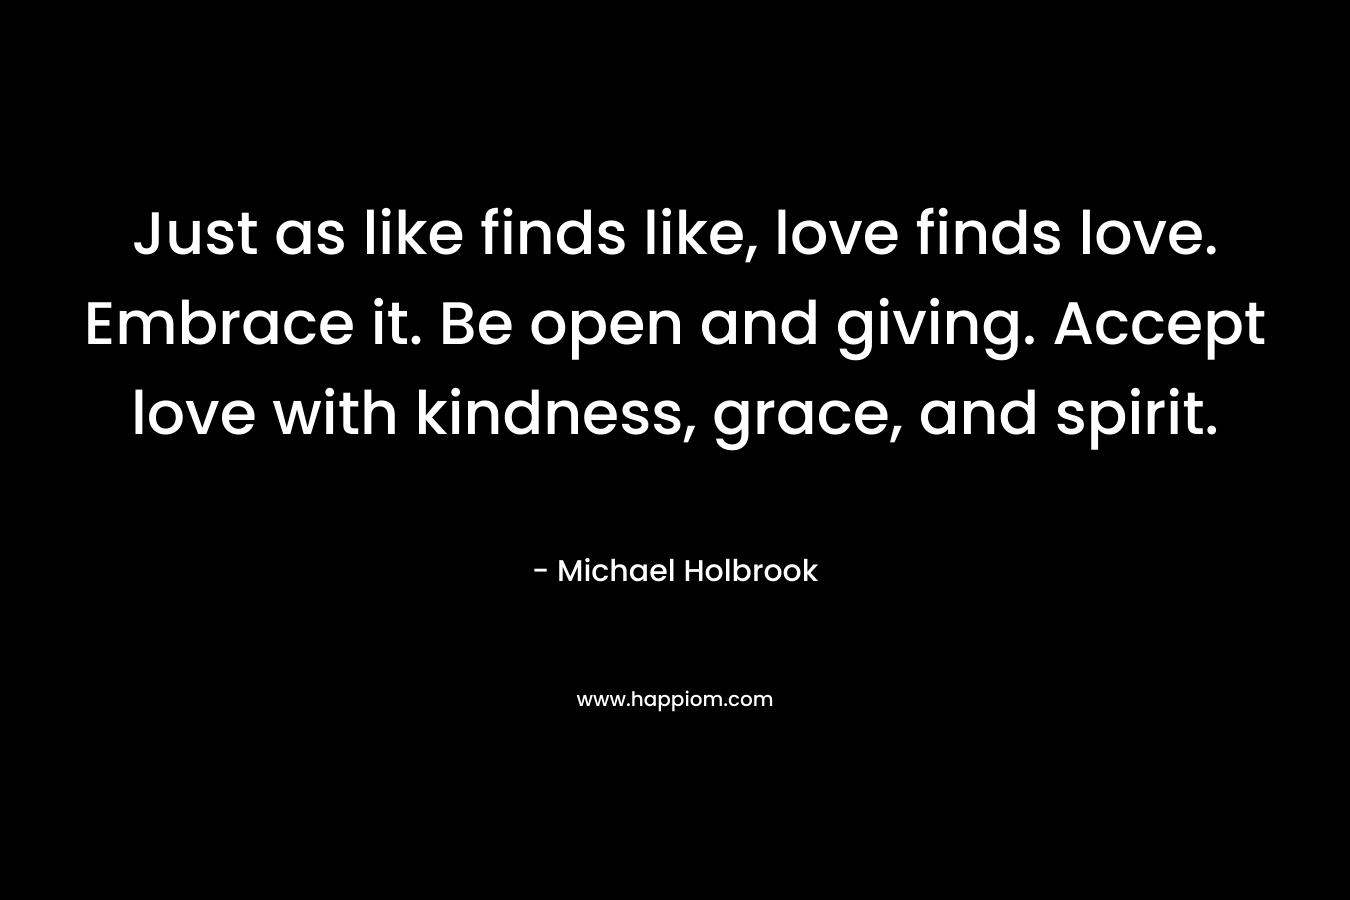 Just as like finds like, love finds love. Embrace it. Be open and giving. Accept love with kindness, grace, and spirit.